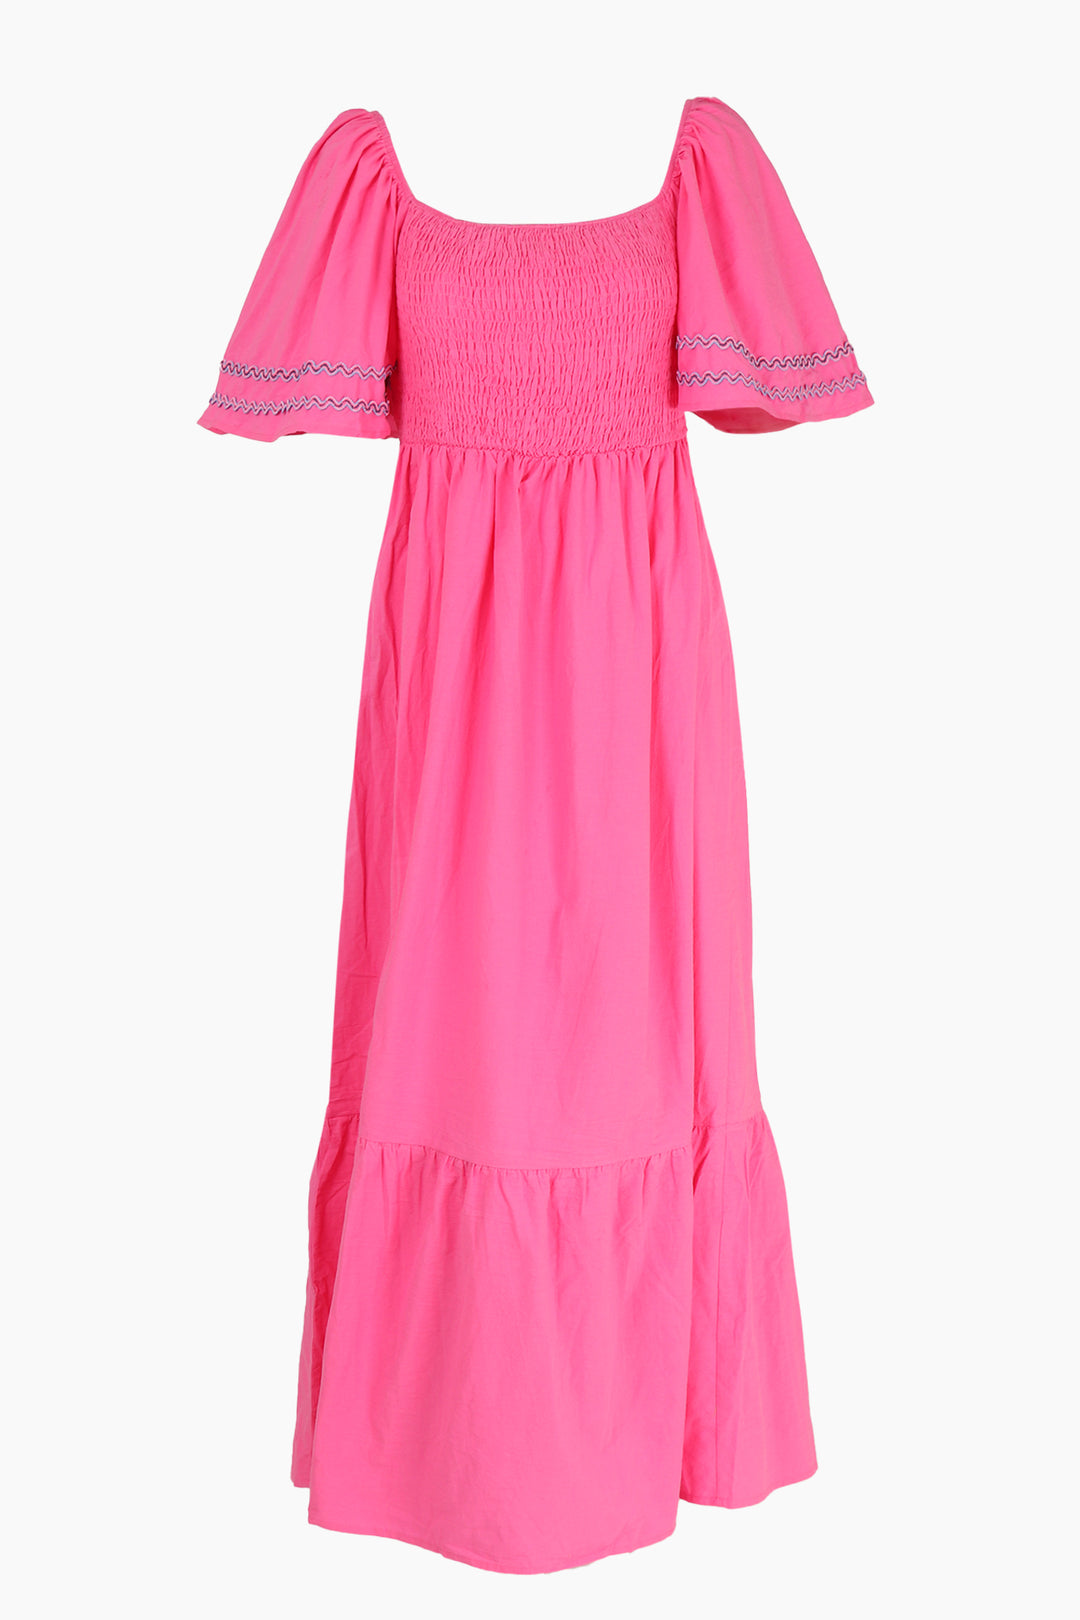 pink maxi milkmaid dress made from cotton, featuring a square neckline, short sleeves and a shirred bust section